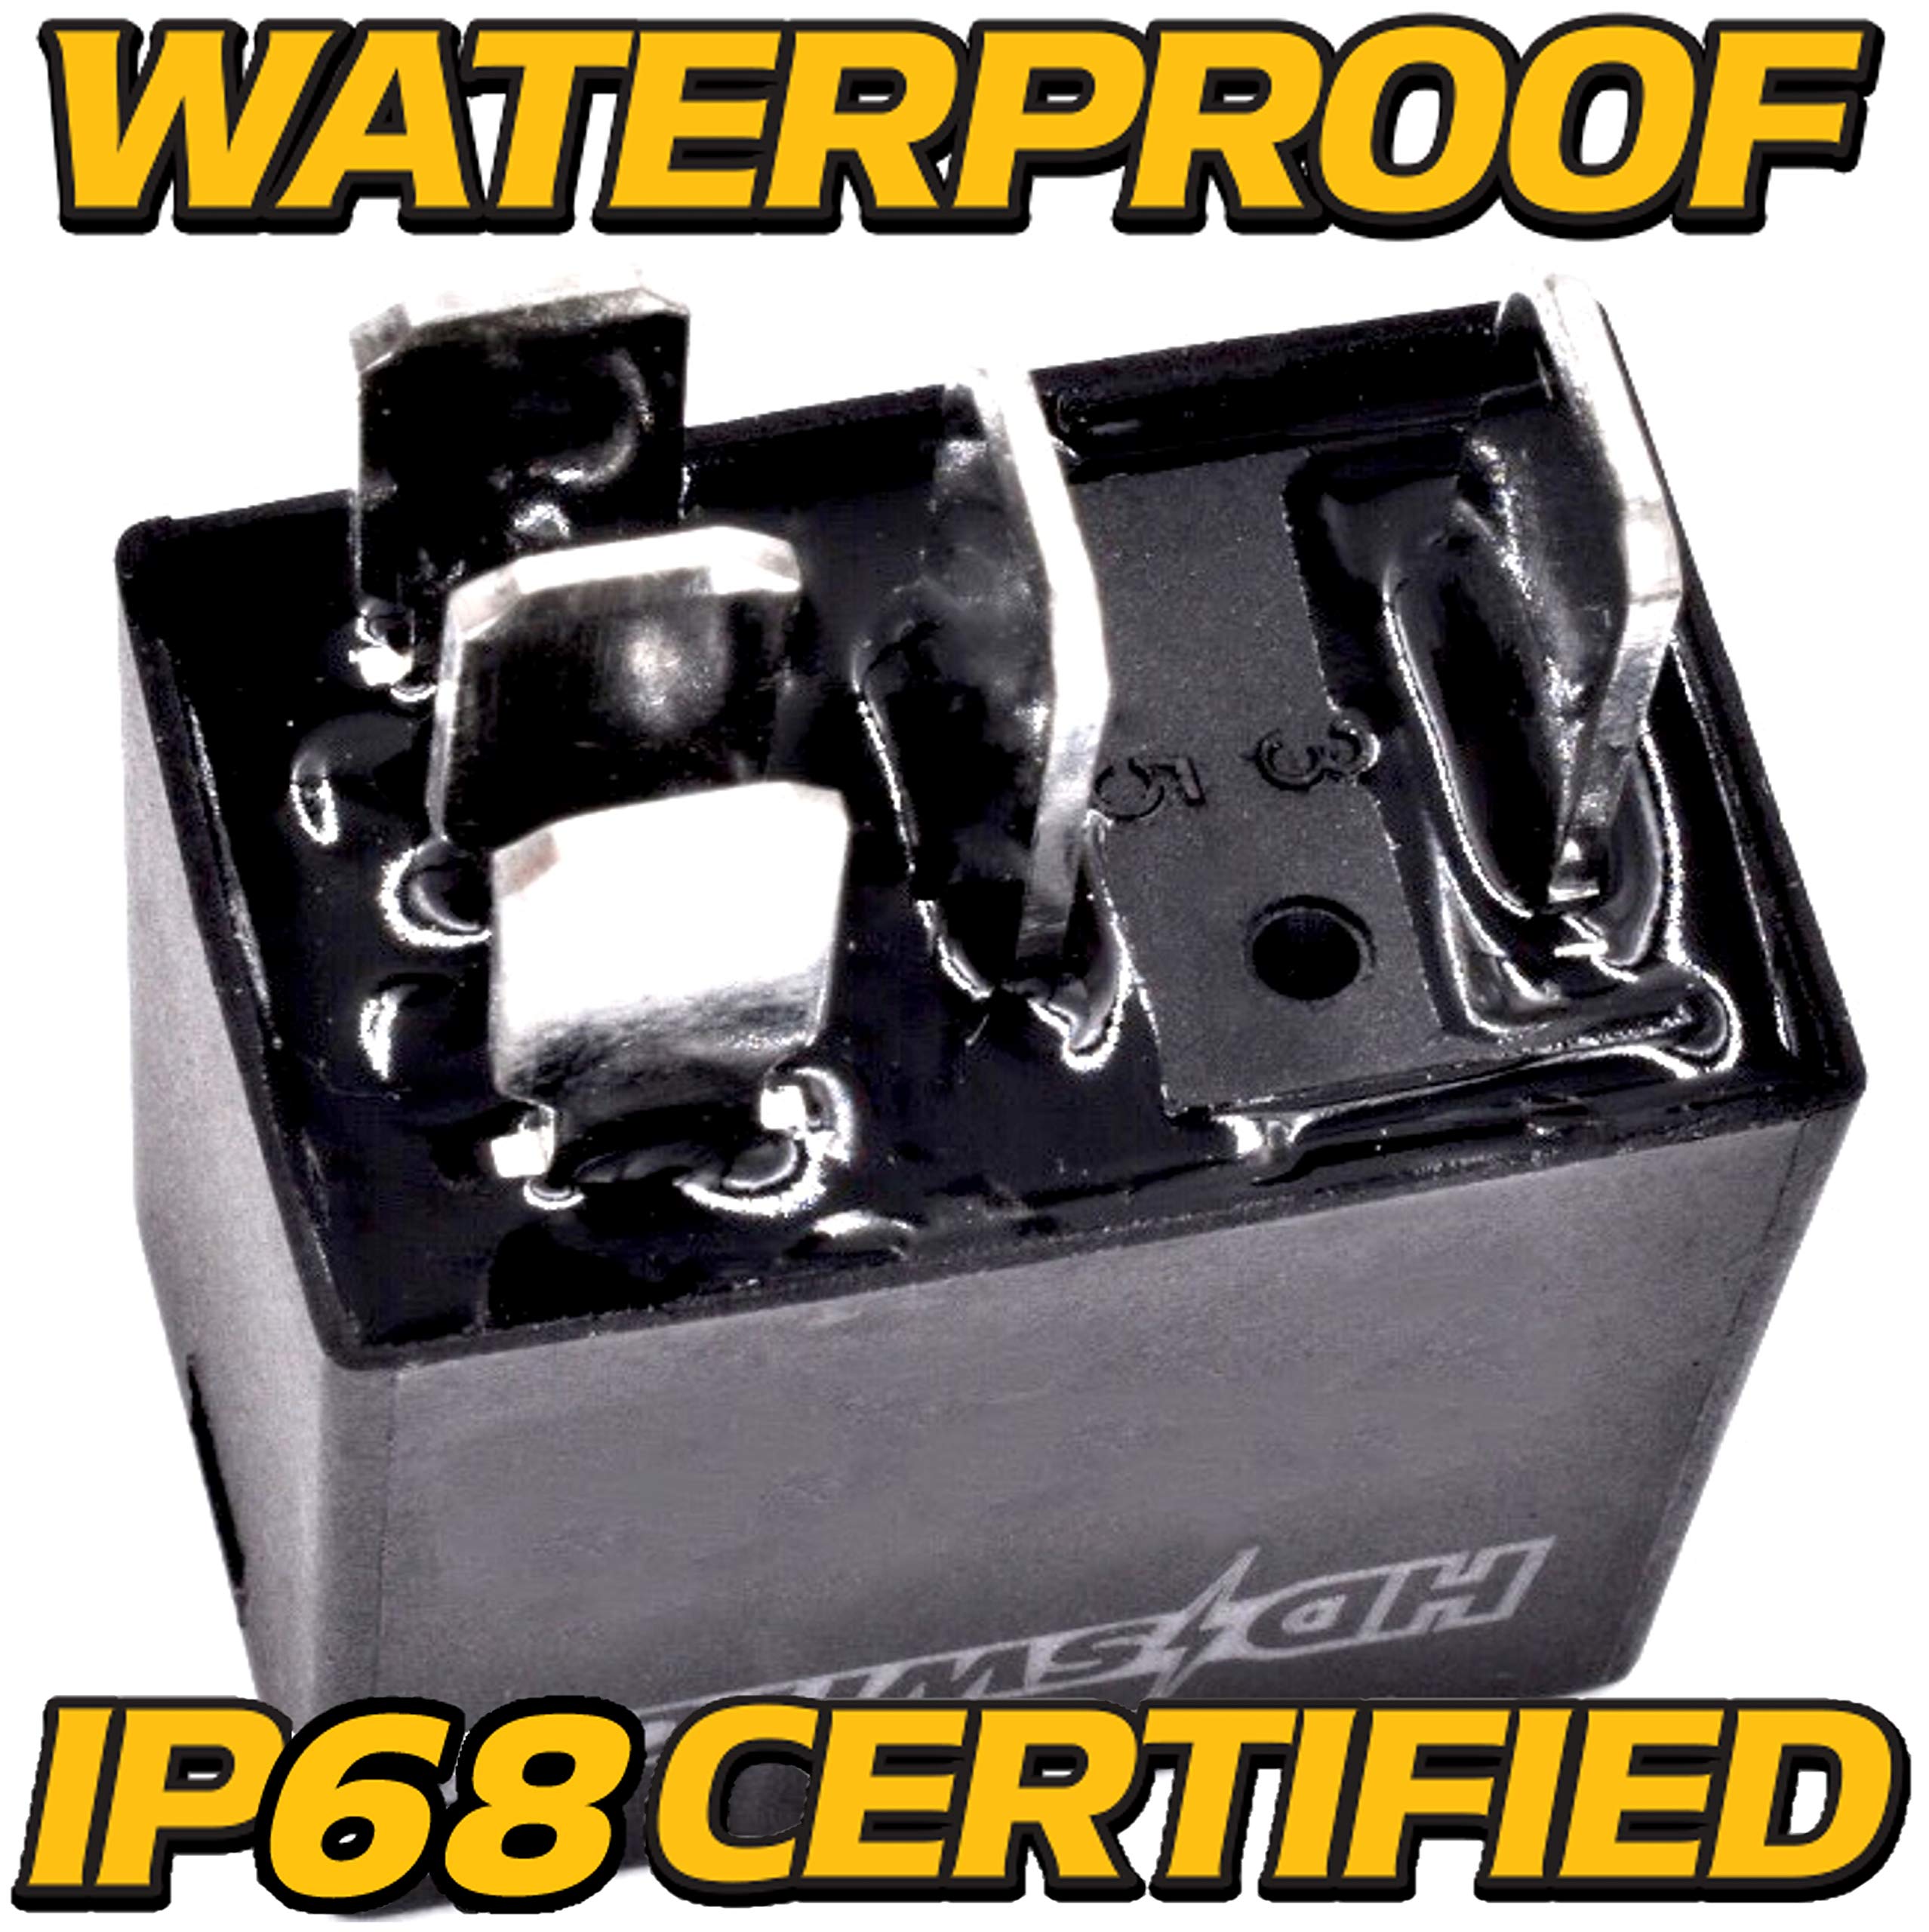 HD Switch 925-1648, 925-1648A, 725-1648, 725-1648A, 725-1648P 12V 30A Waterproof Relay Replaces Cub Cadet, MTD, Bolens, Troy-Bilt, White Outdoor, Yard Man - Dielectric Grease Incuded